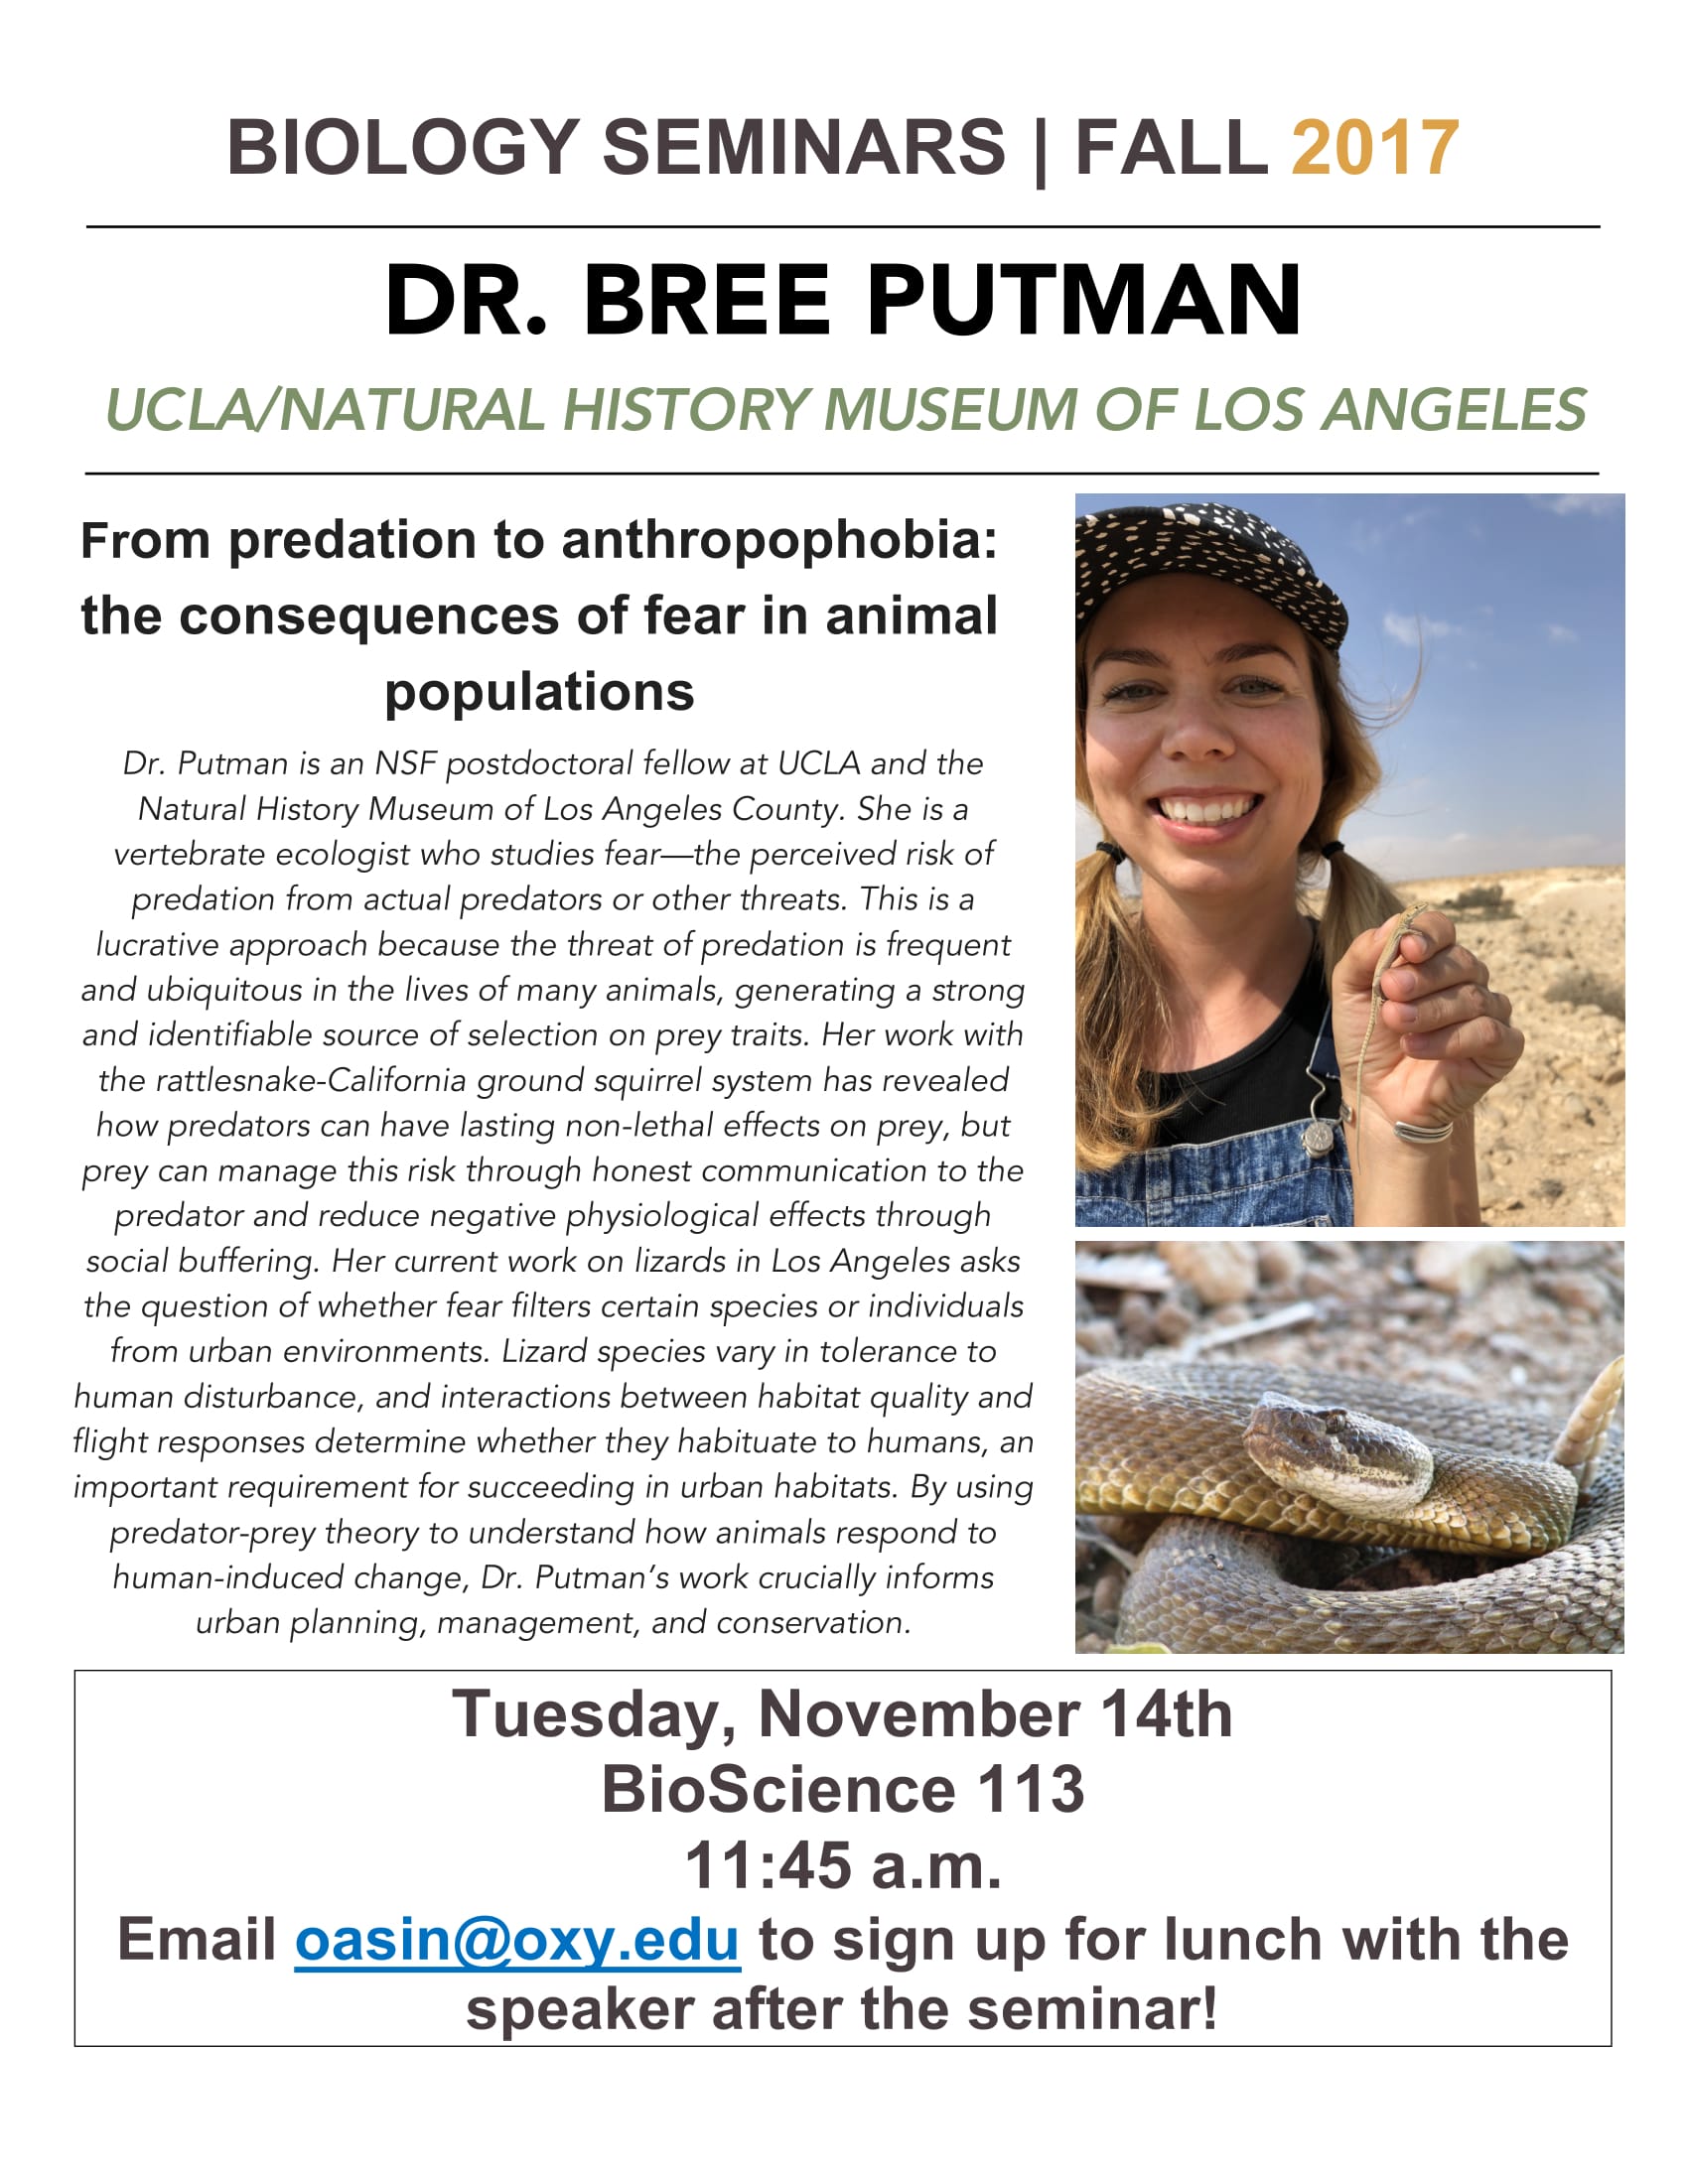 Image for Dr. Bree Putman - From predation to anthropophobia